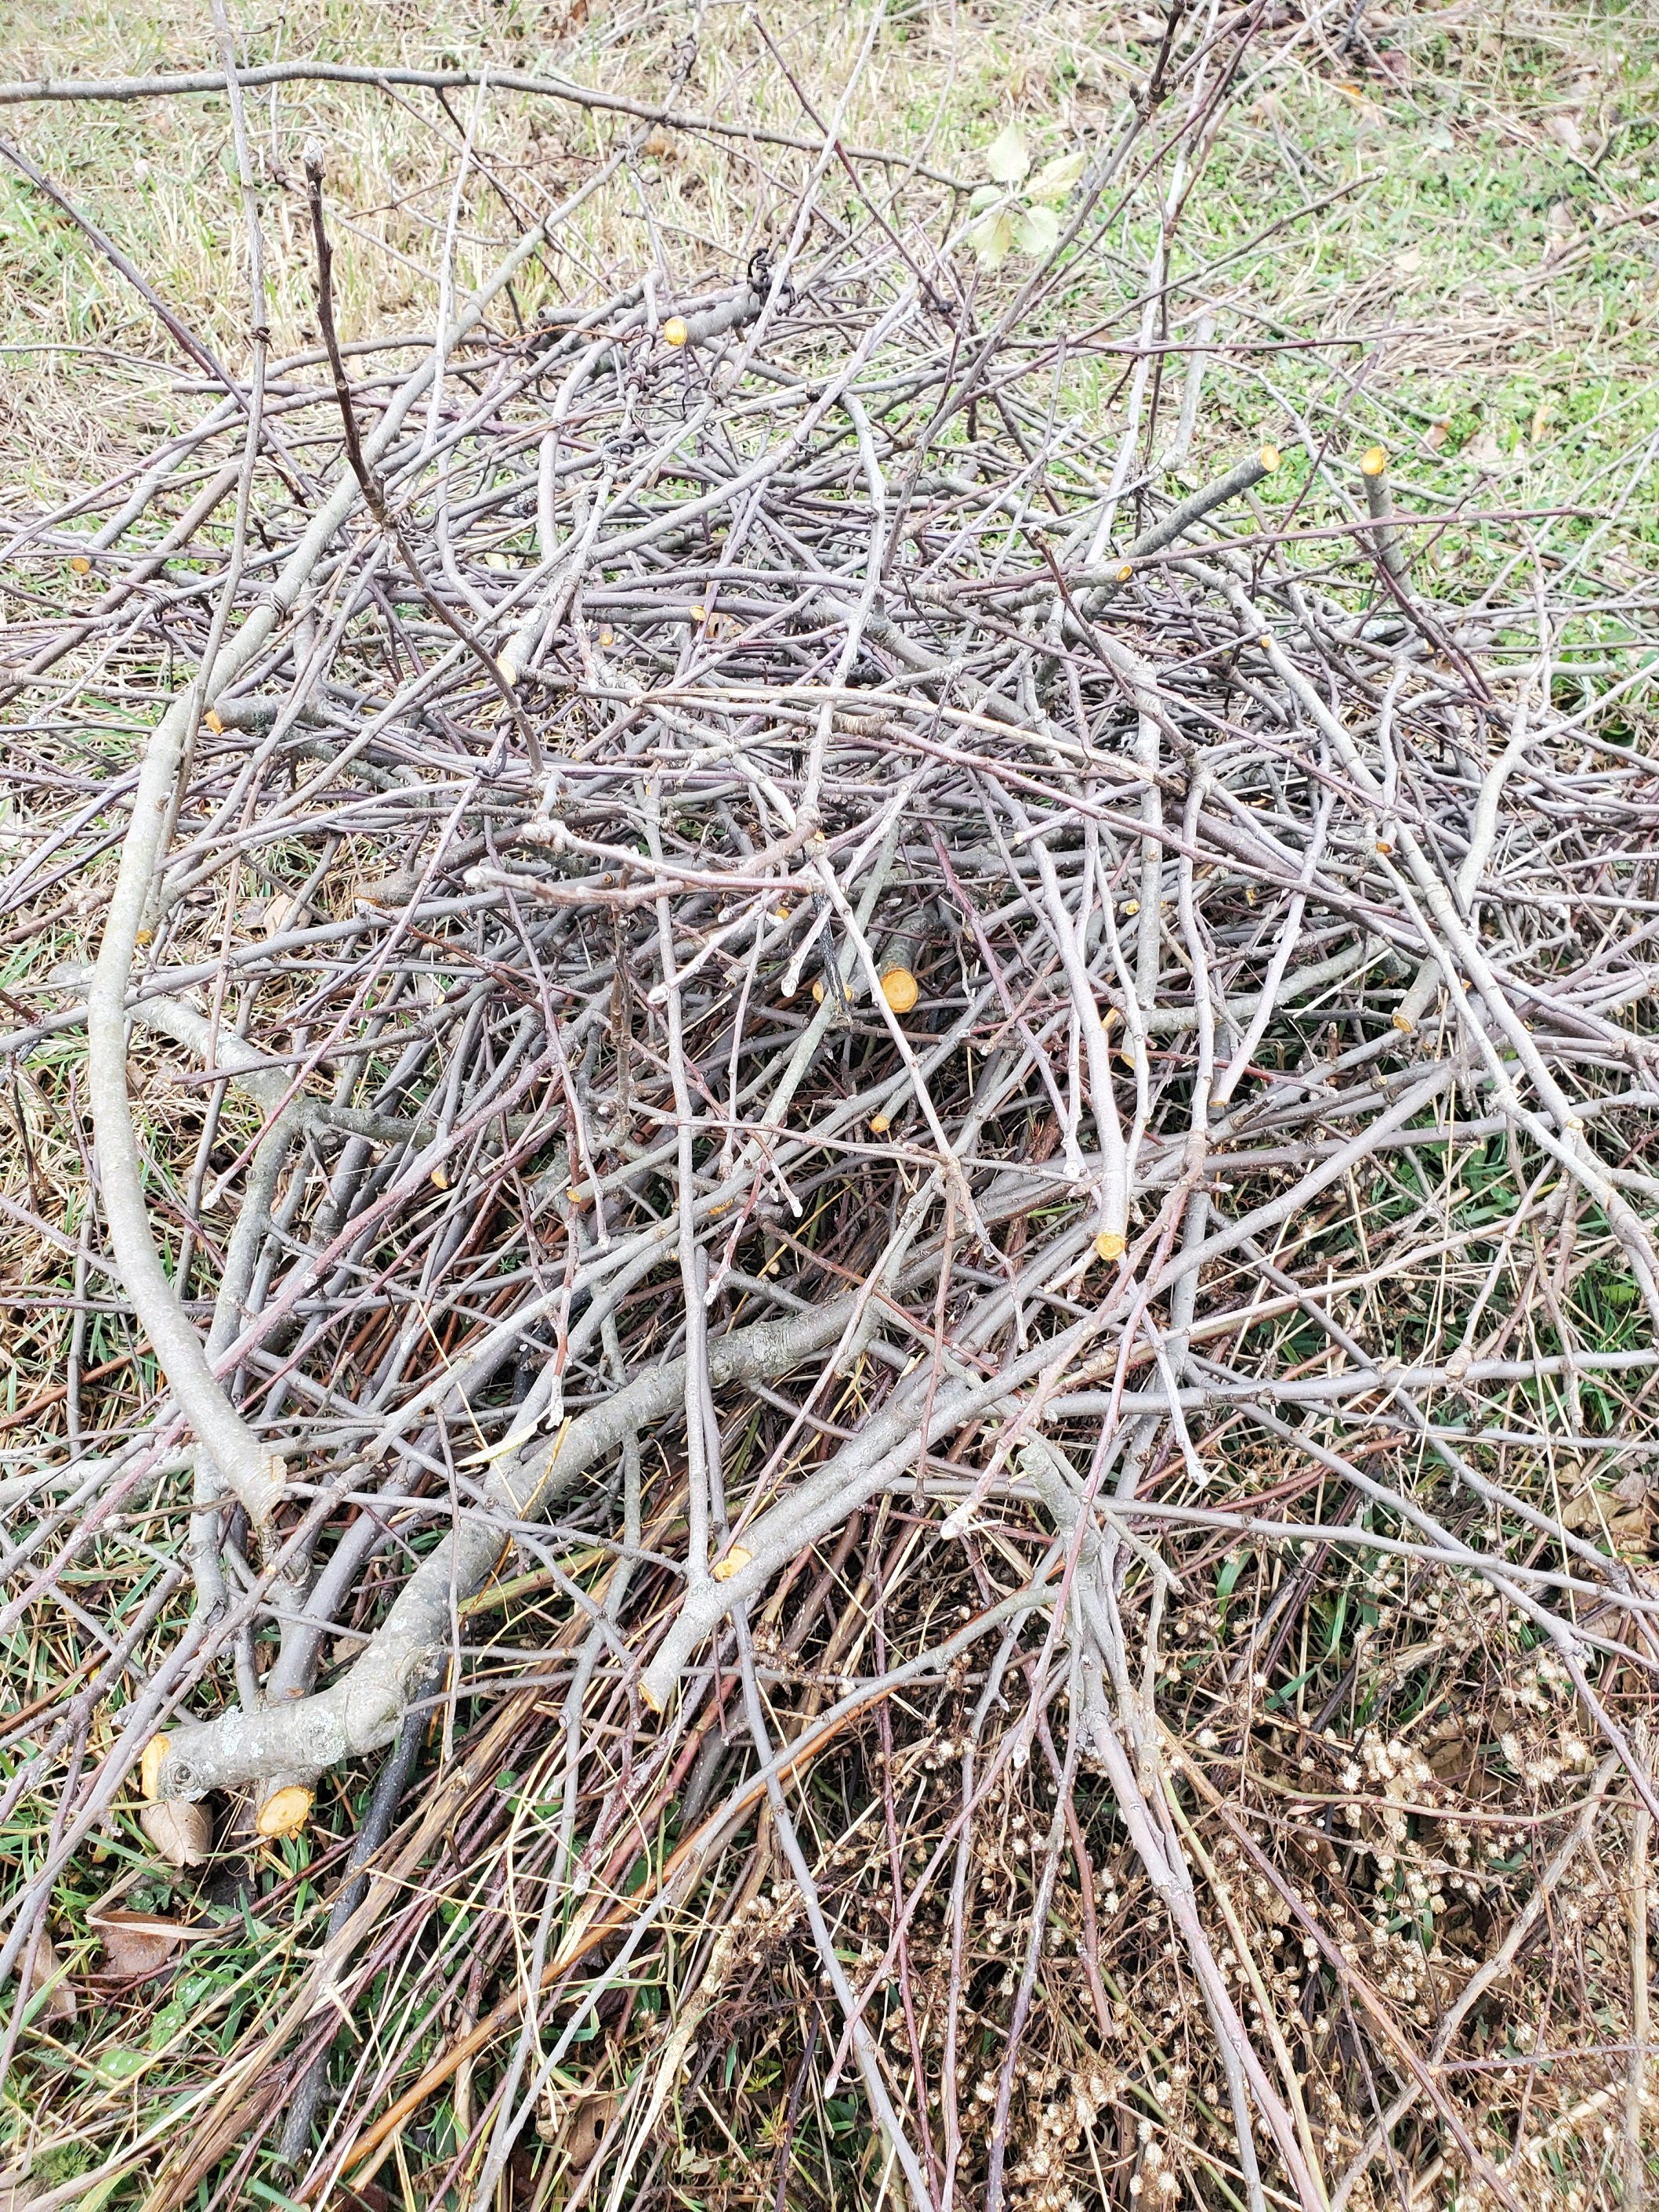 Previous Happening: Isn't that just a pile of sticks?